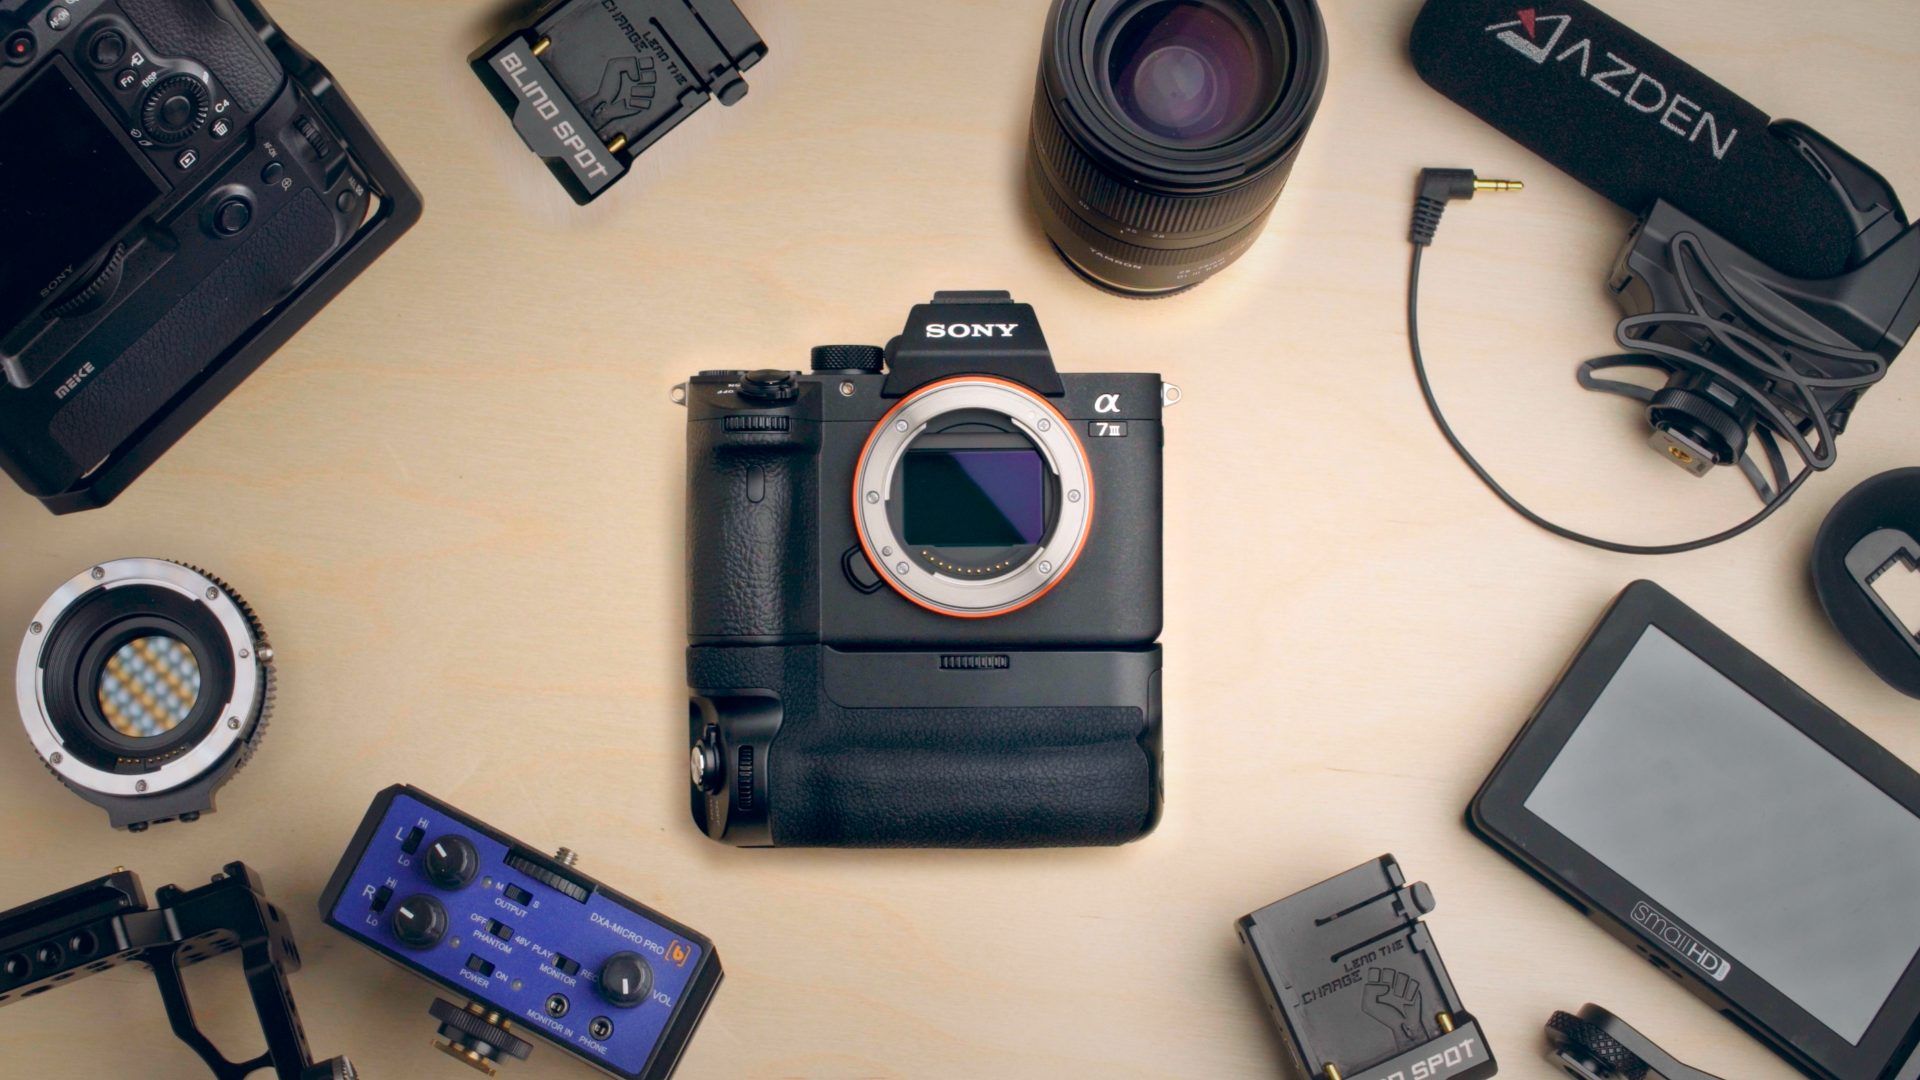 Video Gear for the Sony A7 III